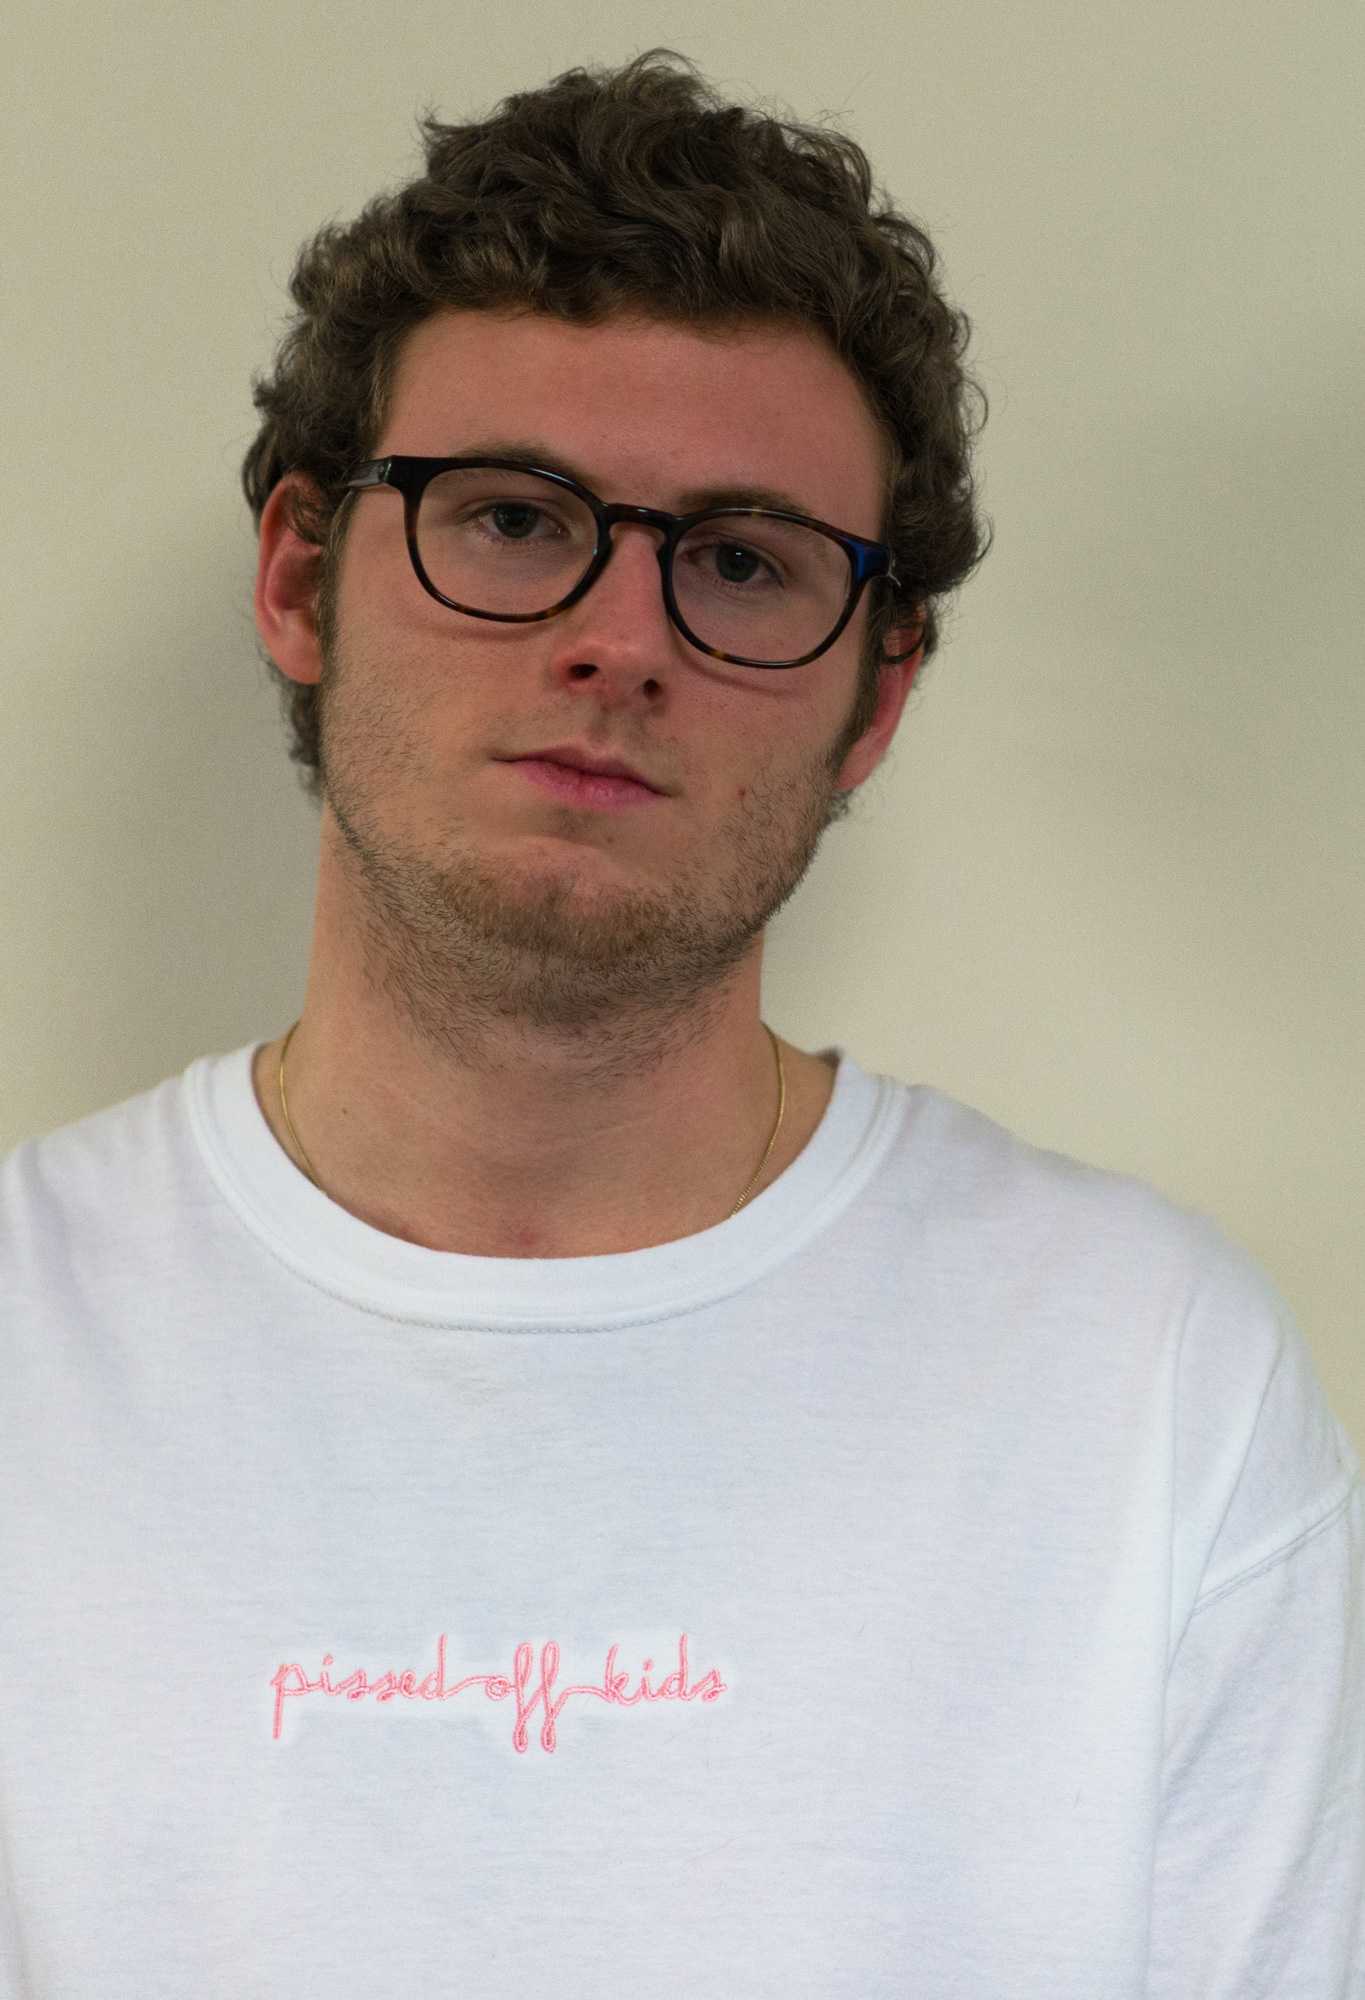 Senior communication/journalism major Hunter Greer wears a white Pissed Off Kids t-shirt. Pissed Off Kids t-shirts come in white, pink, blue and black, all with pink stitching. Photo by Dallas Linger, photo editor.